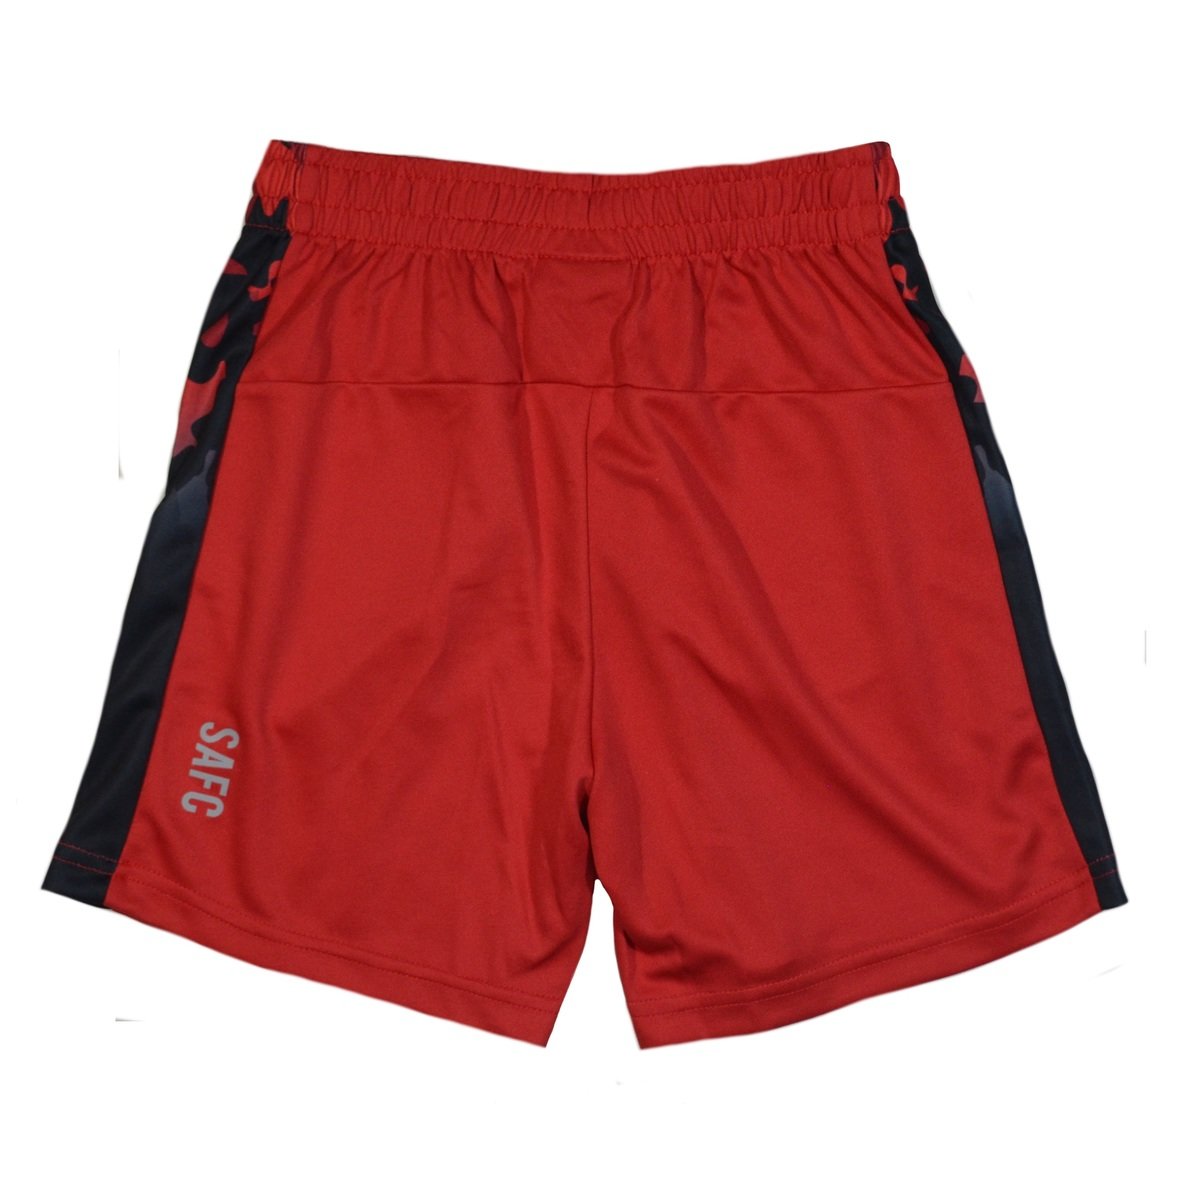 Buy the SAFC RAWA Junior Shorts online at Sunderland AFC Store